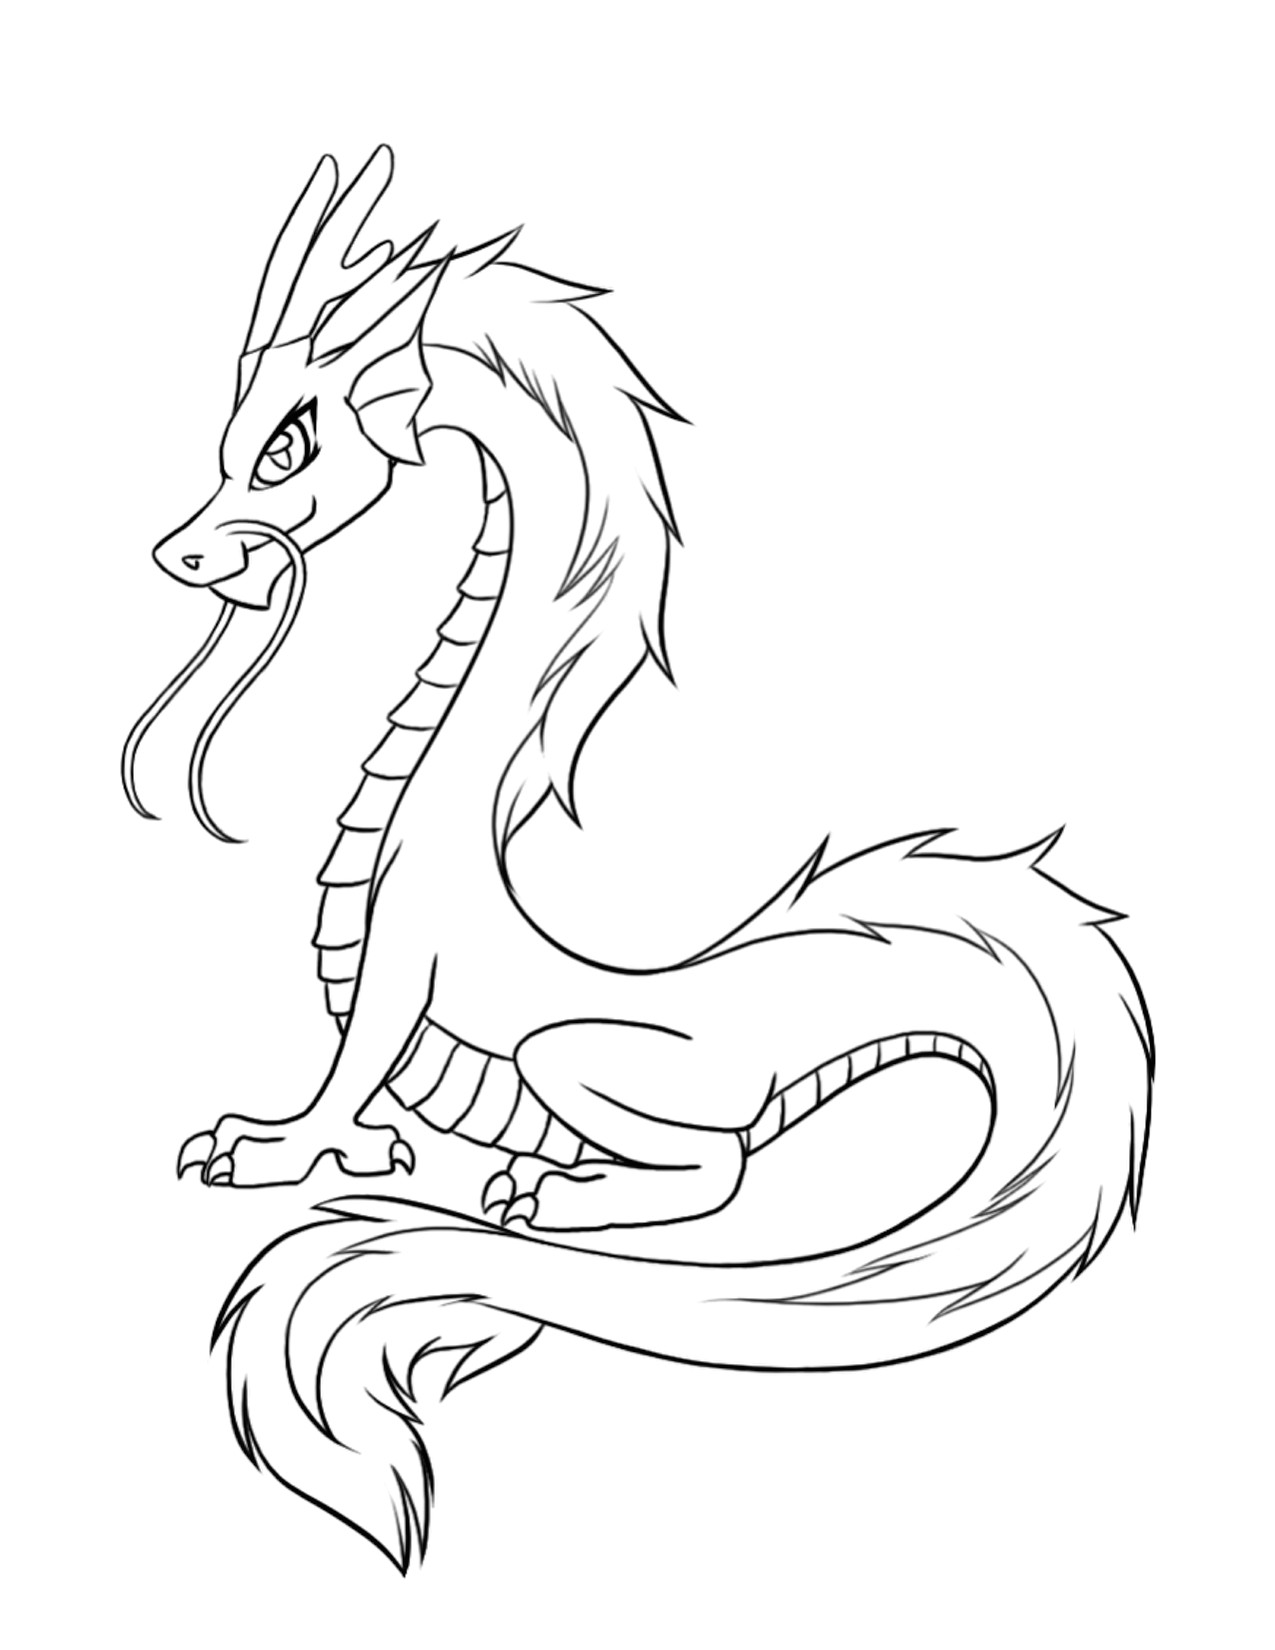 Drawing A Chinese Dragons Free Printable Dragon Coloring Pages for Kids Dragon Sketch